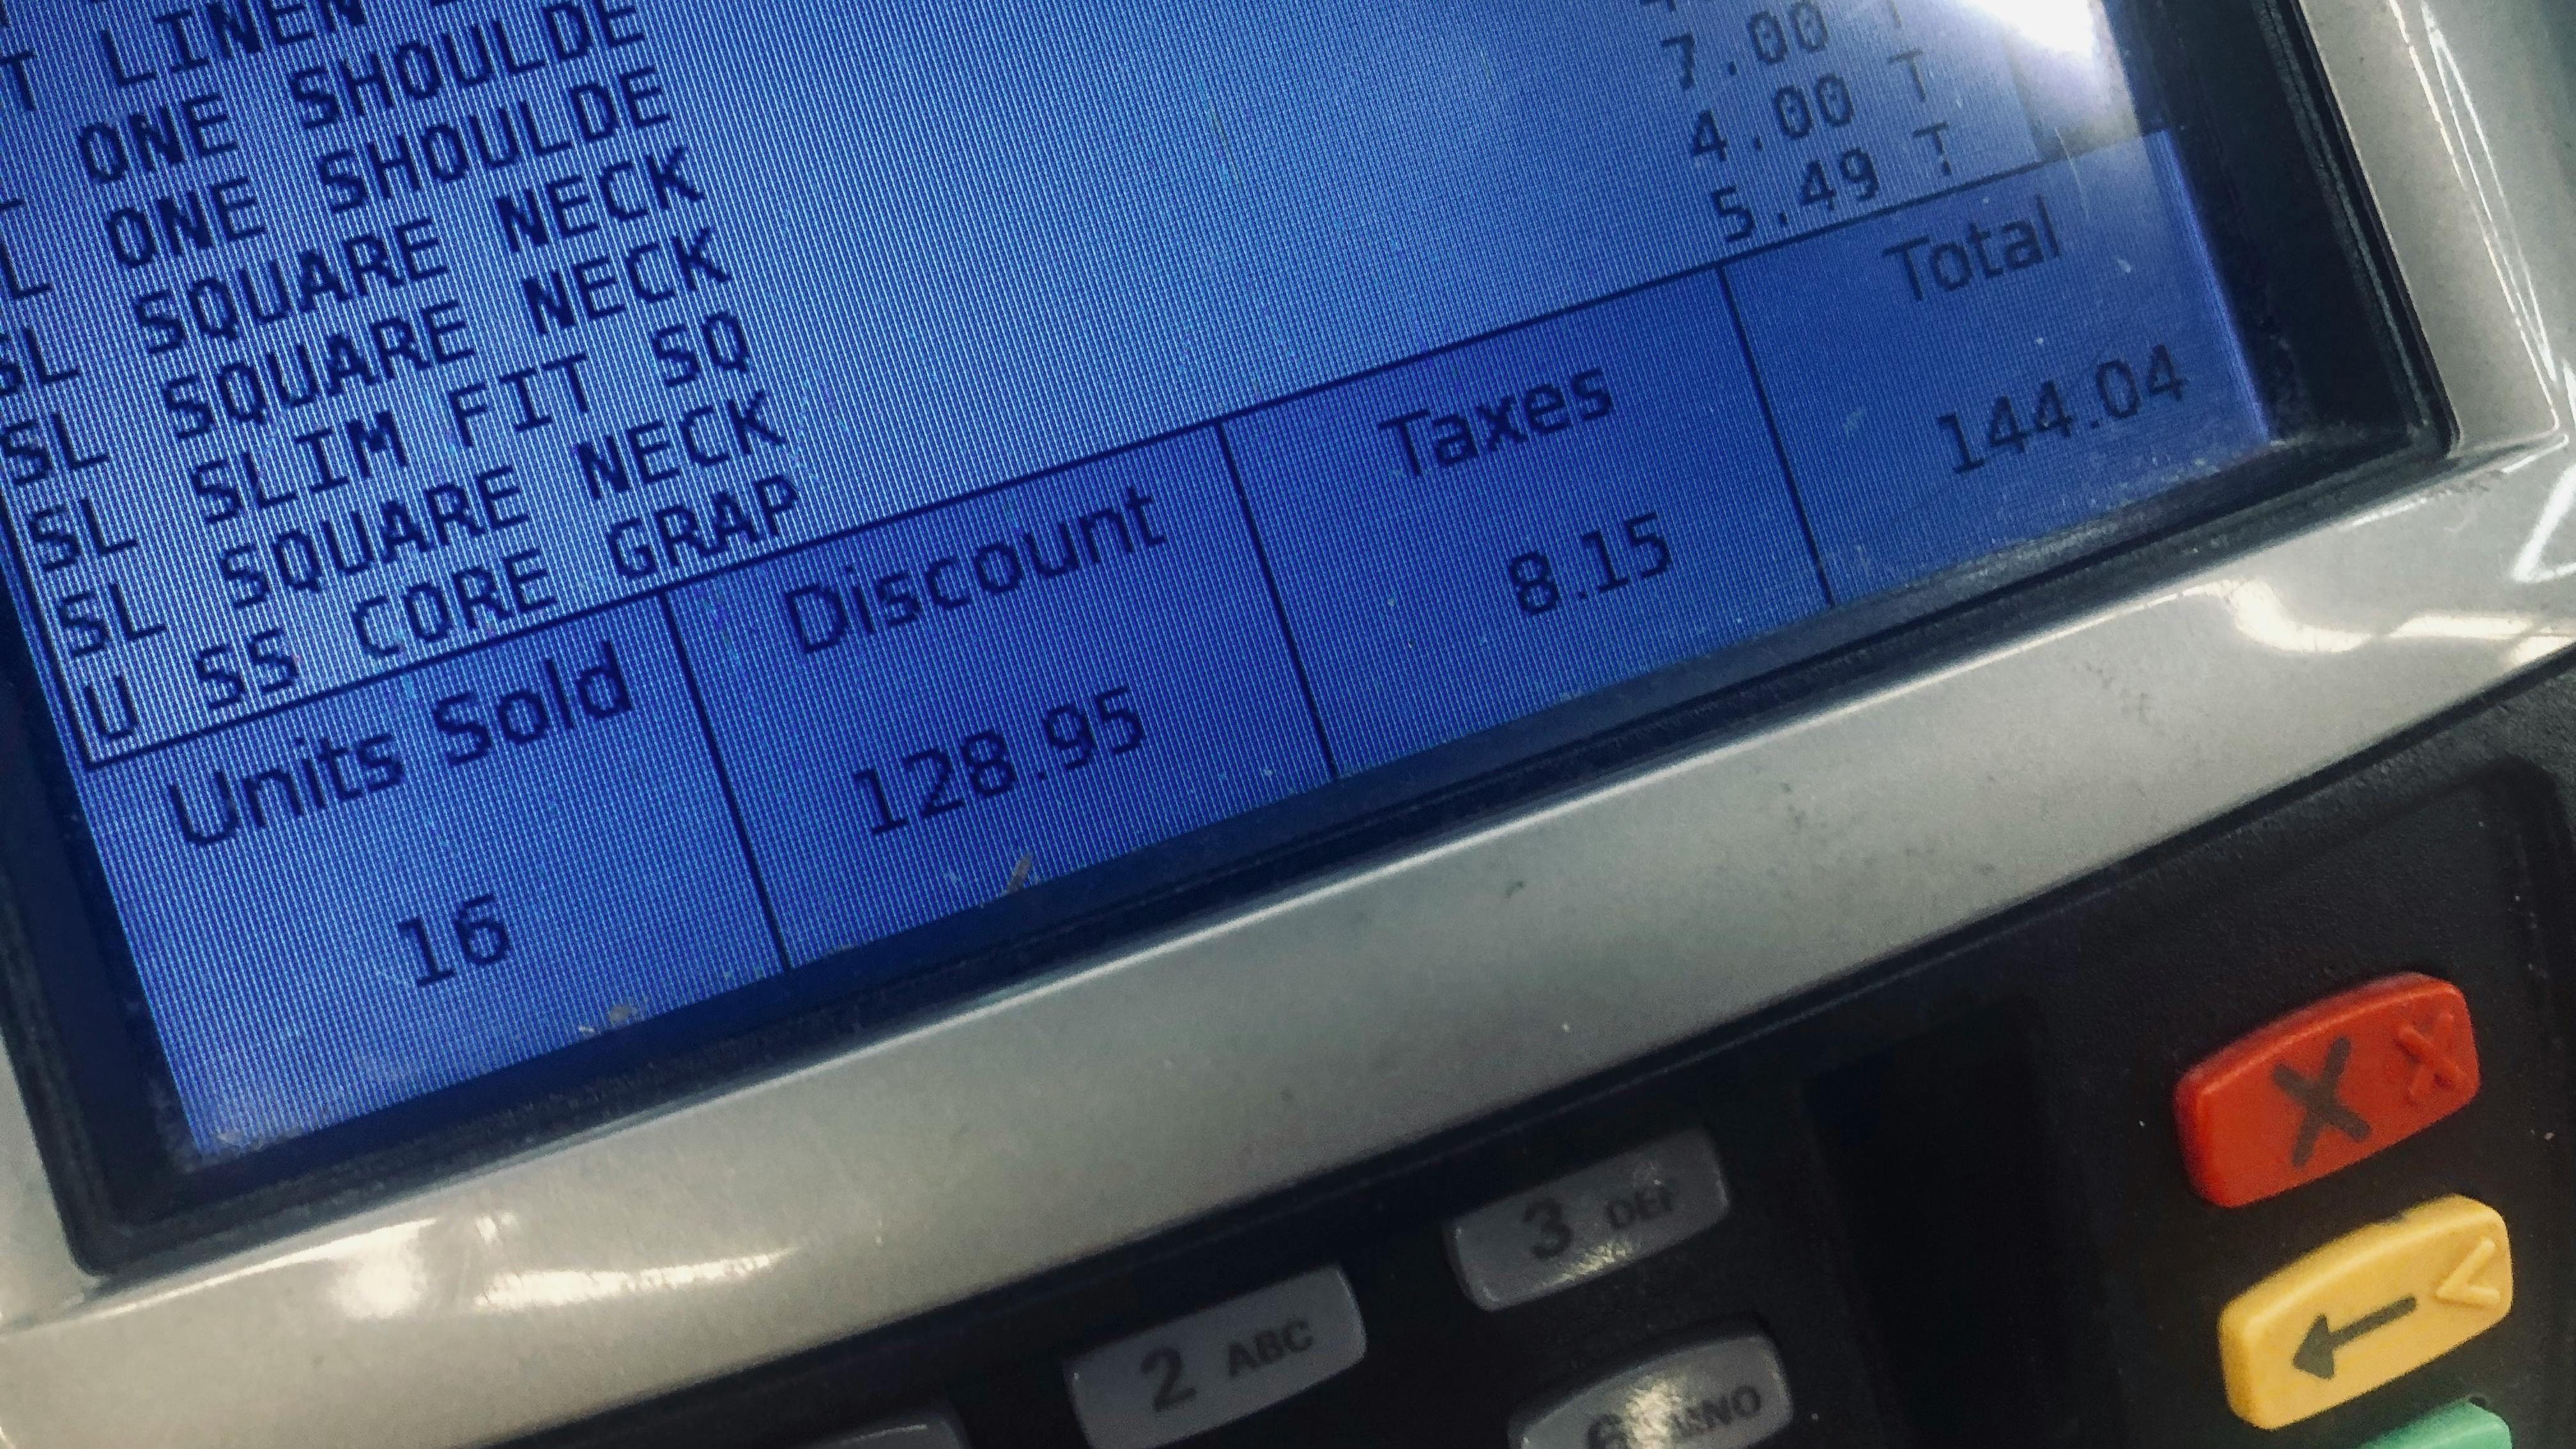 close up of old navy register showing the price at checkout